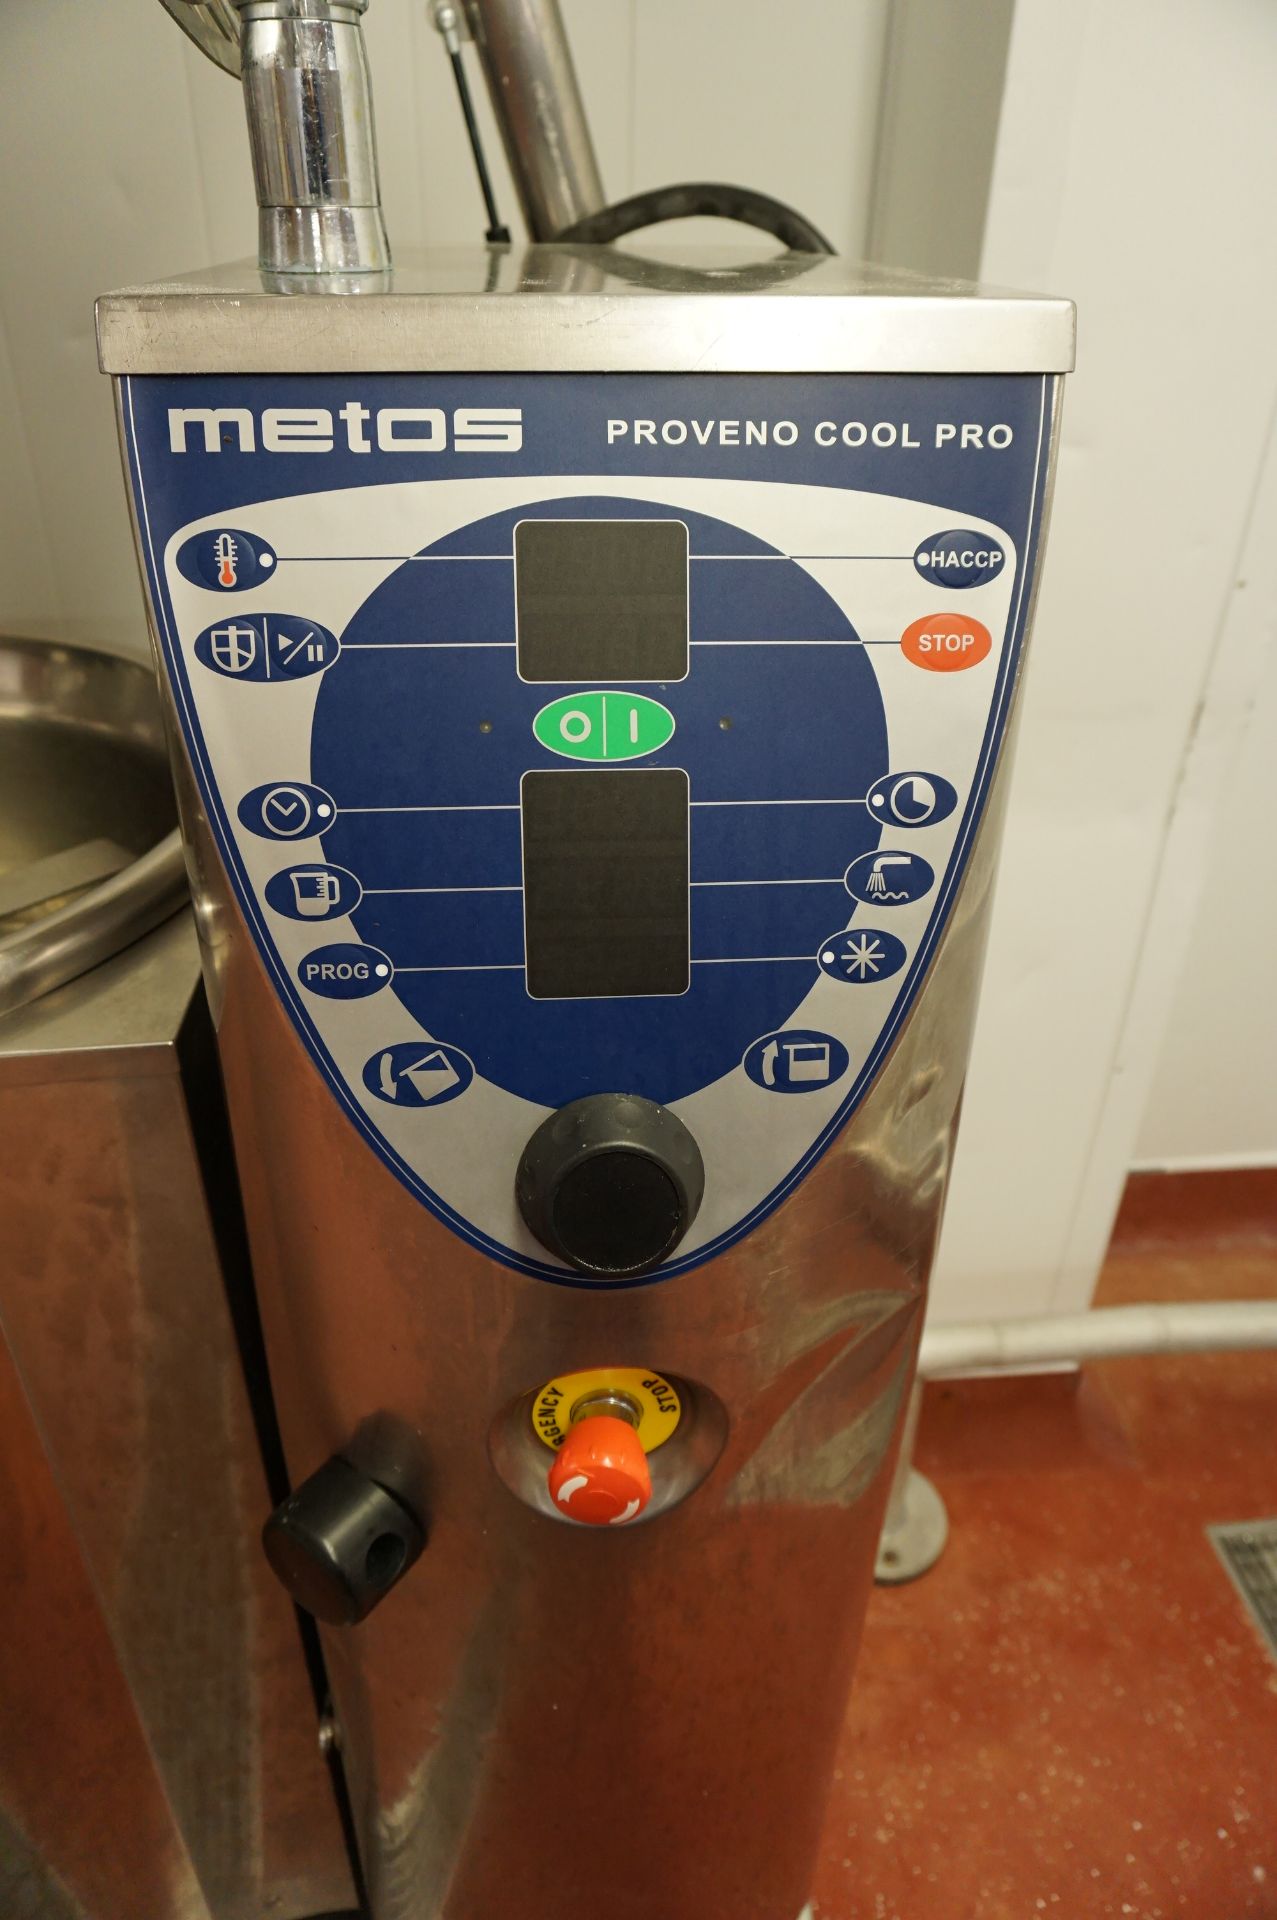 Metos, Model: Proveno Cool Pro 80E, Approx 100L cook and cool vat, Serial No. 10911006040010 - Image 2 of 4